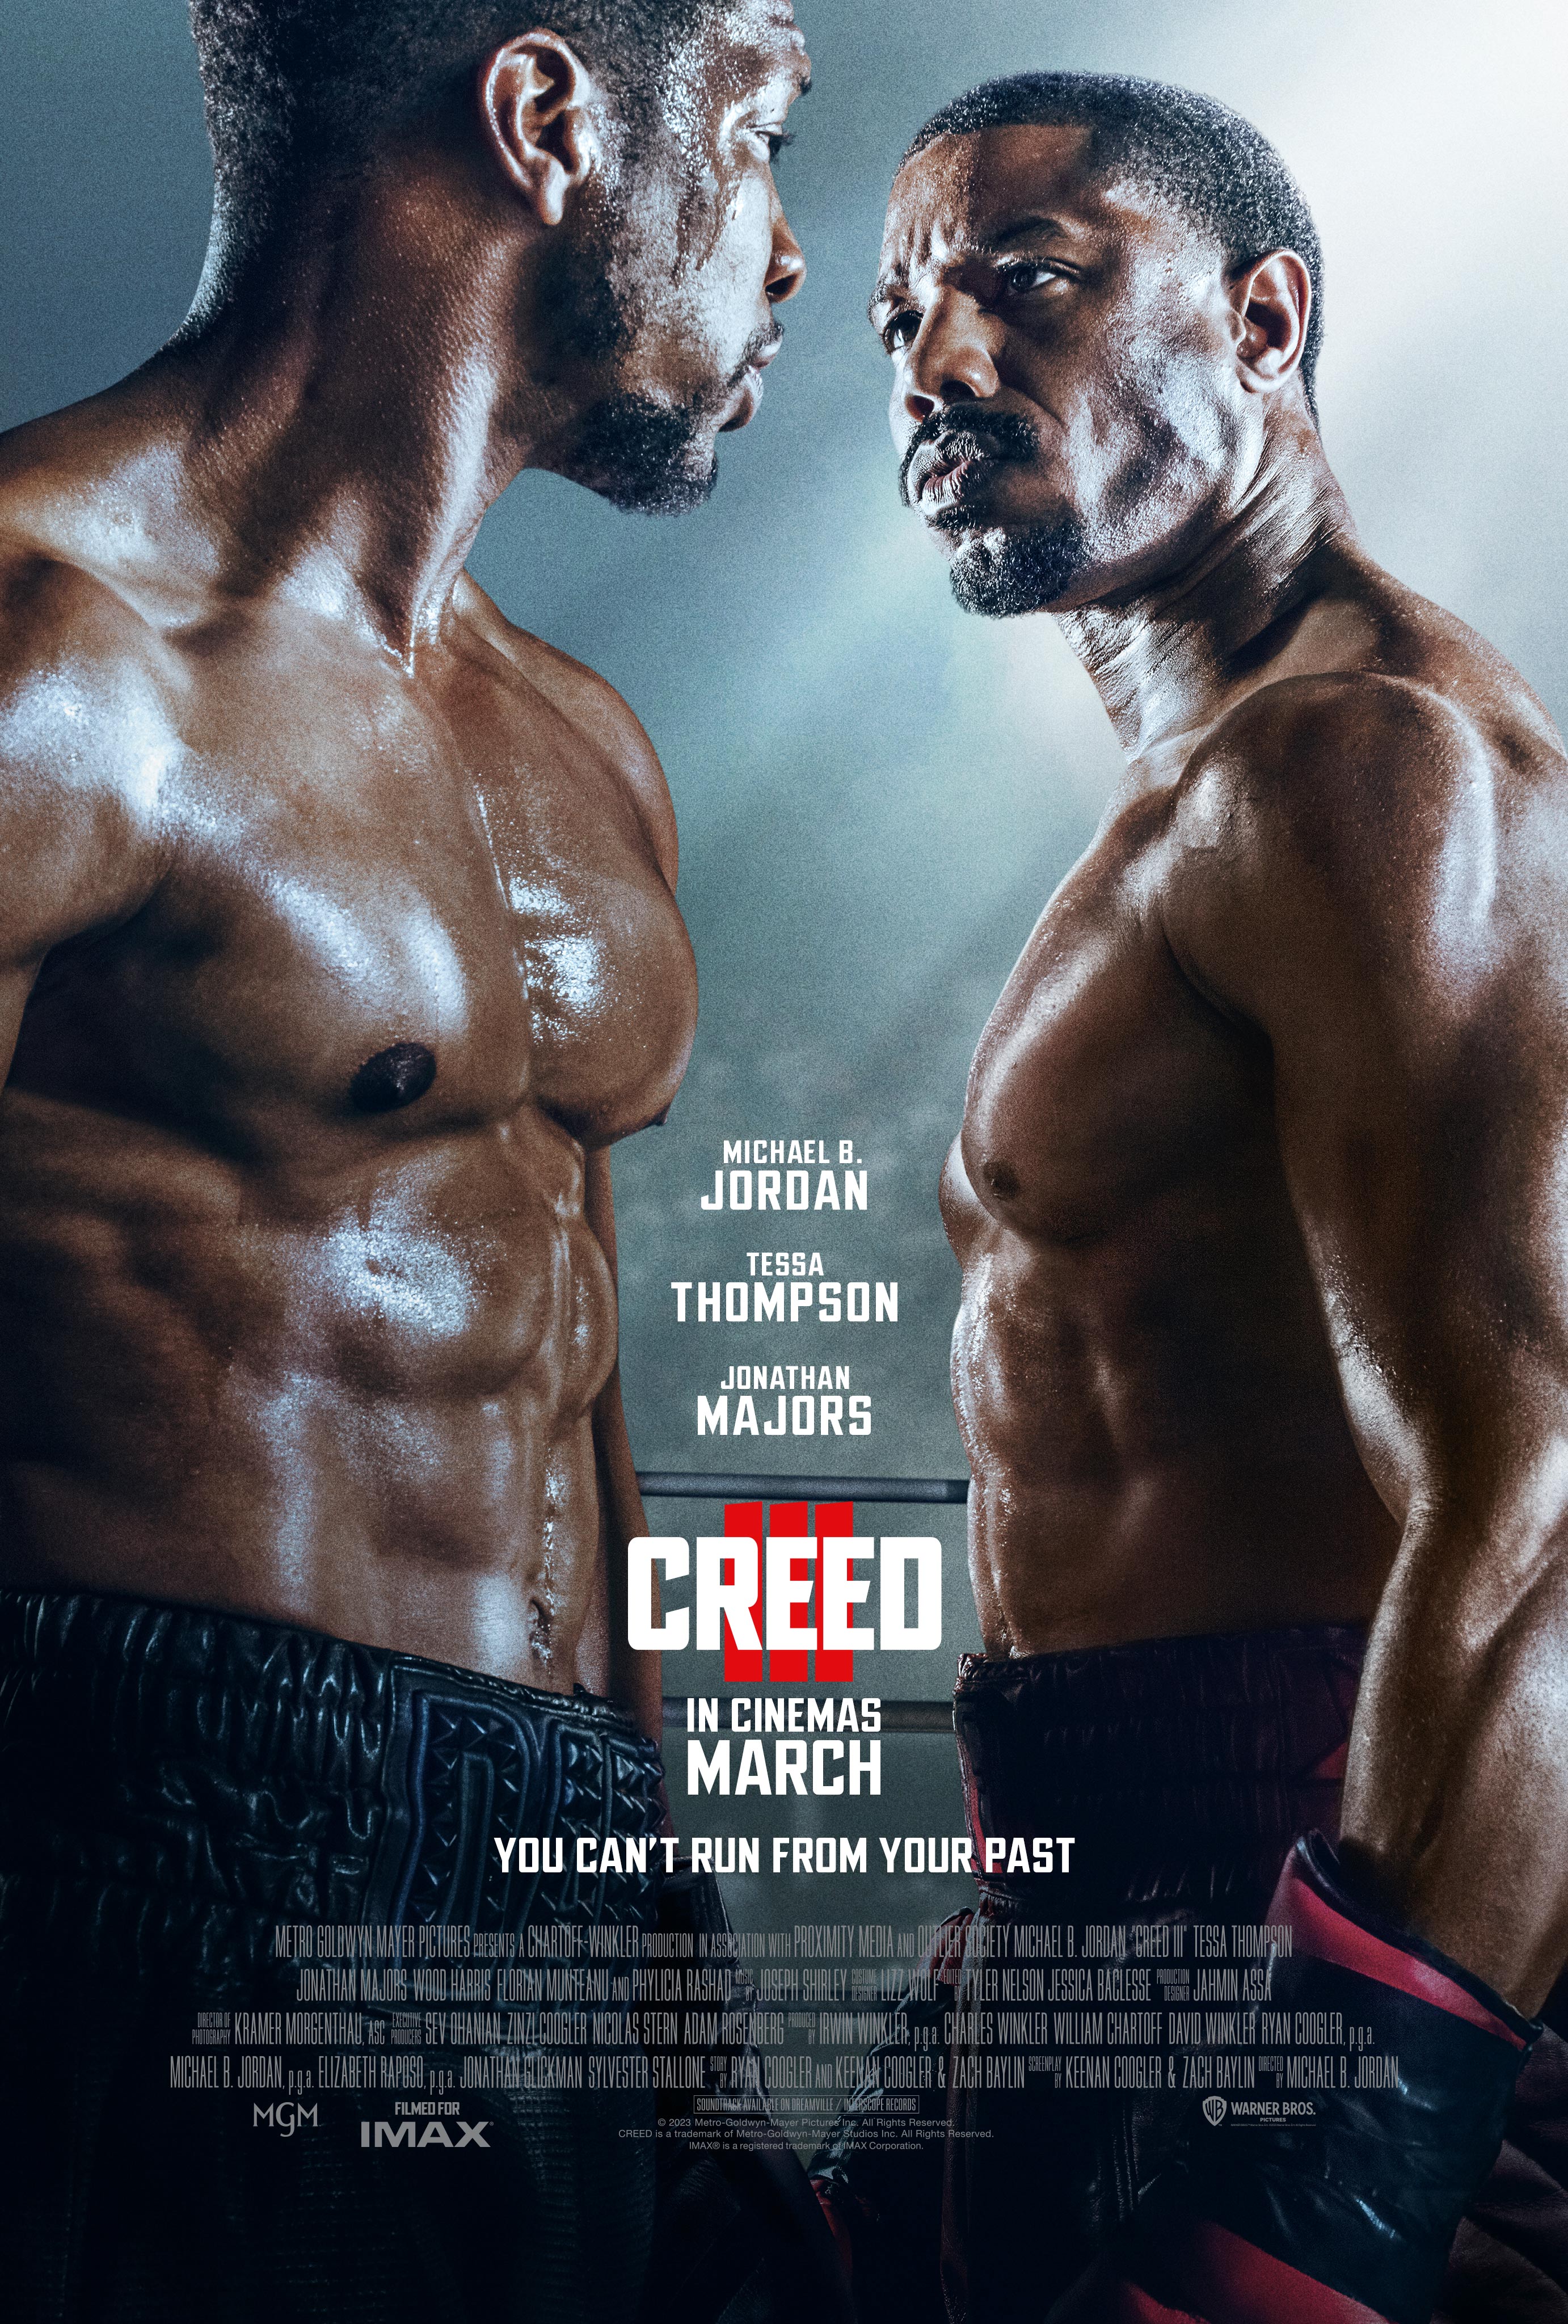 Creed 3 movie poster